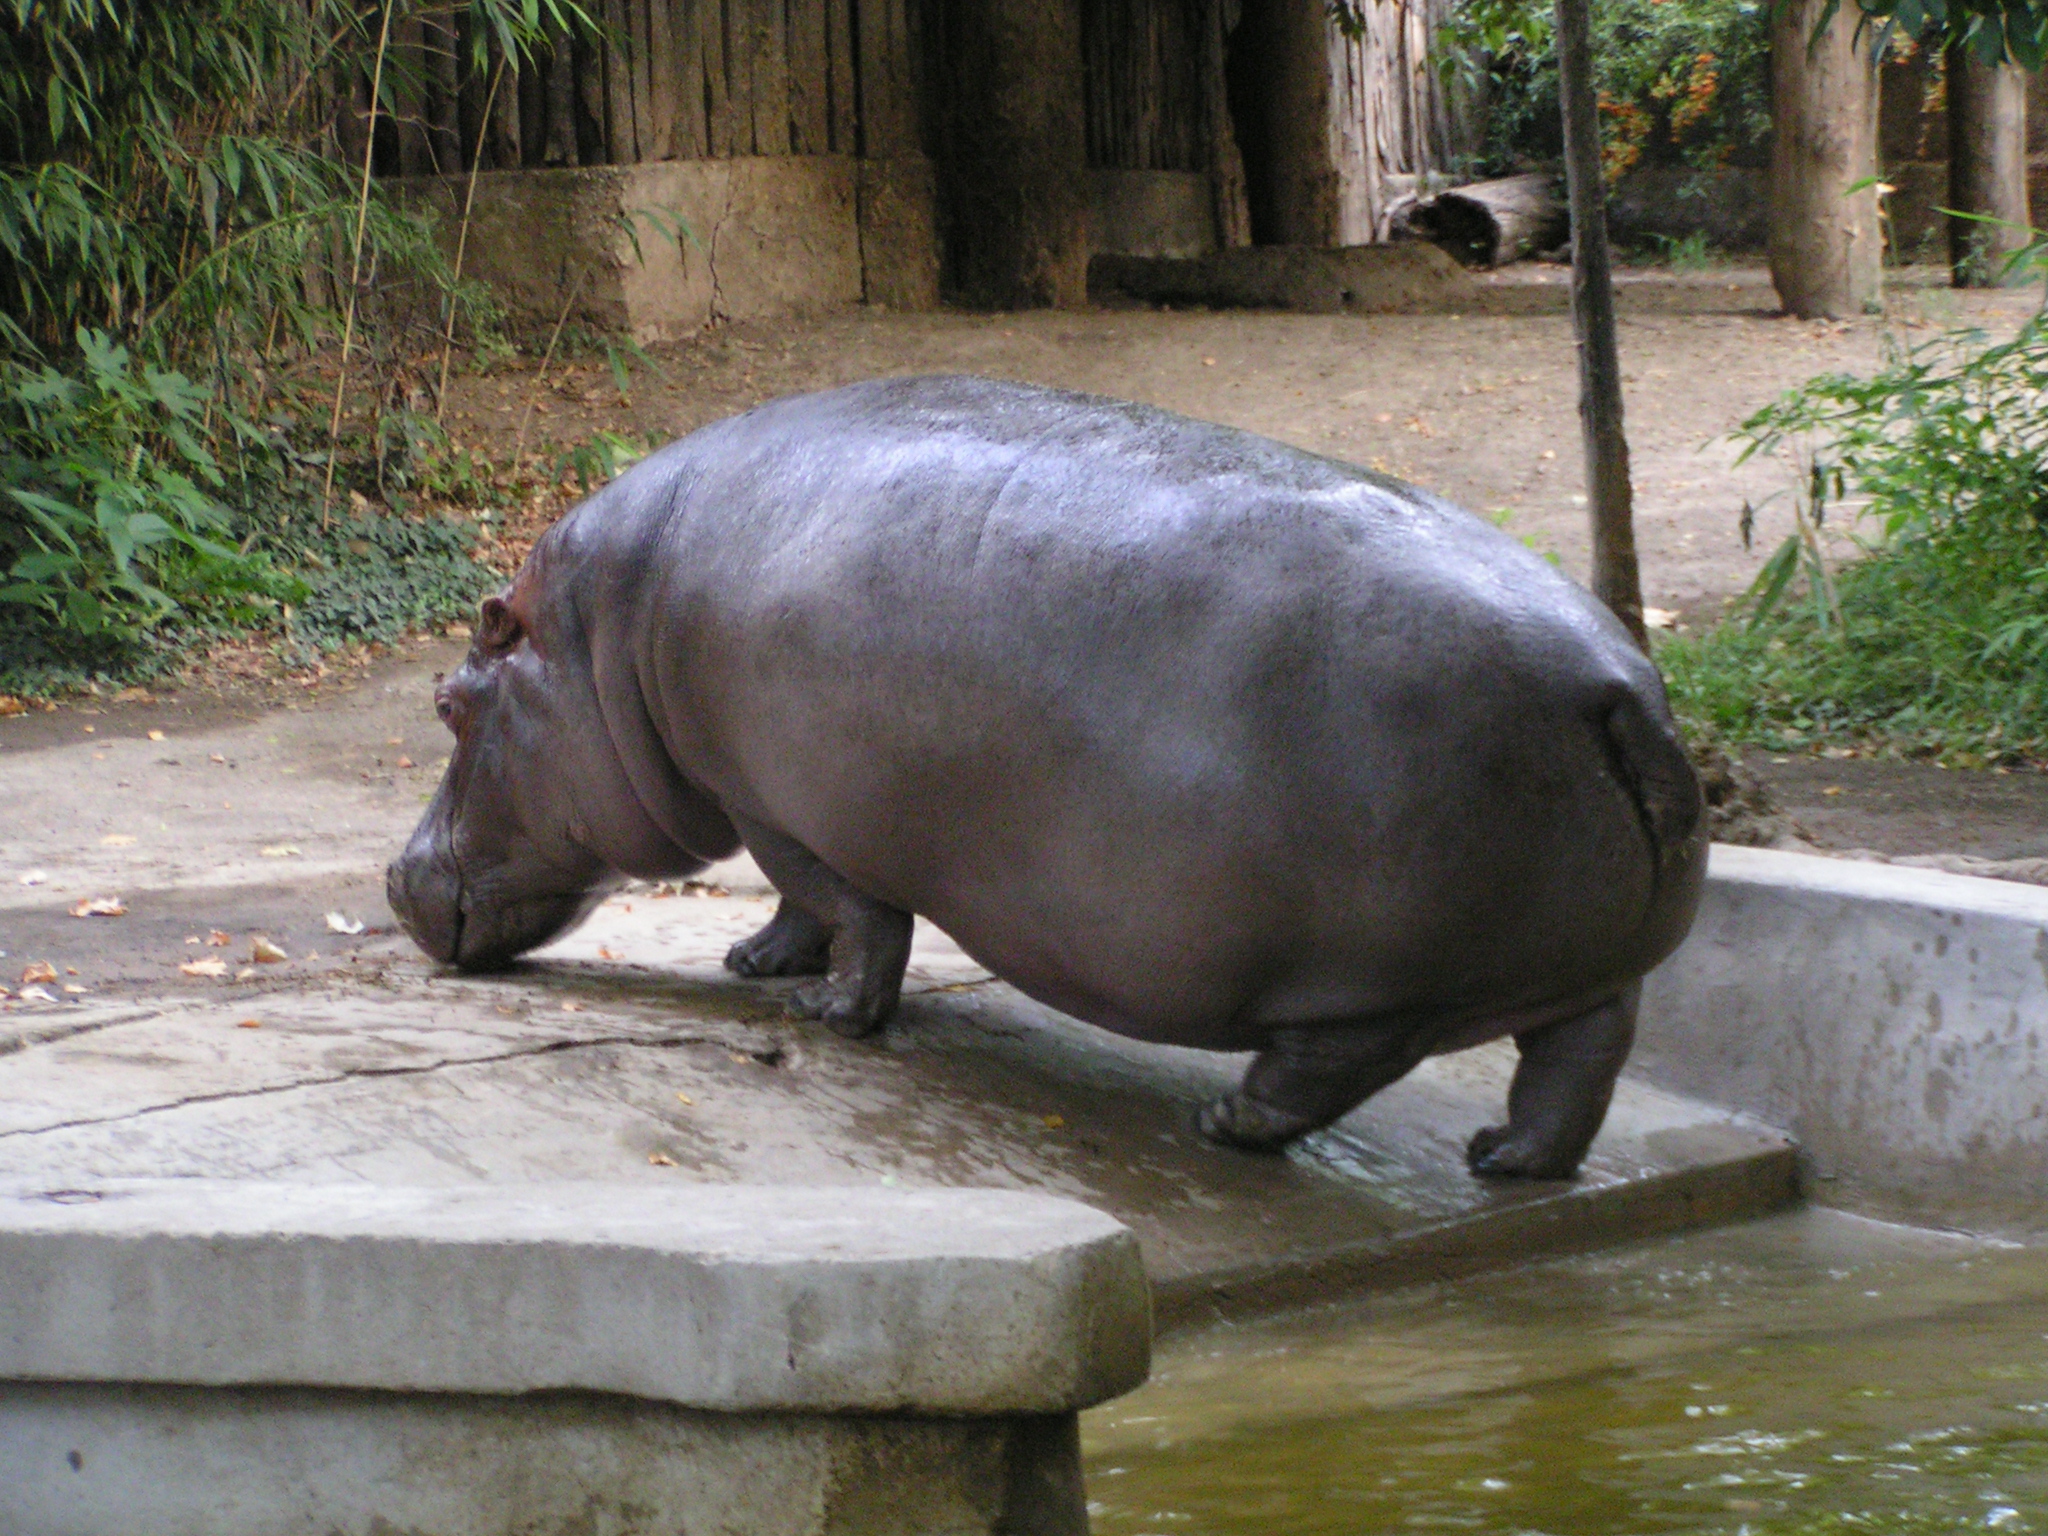 a hippopotamus standing in the water, on top of a stone platform